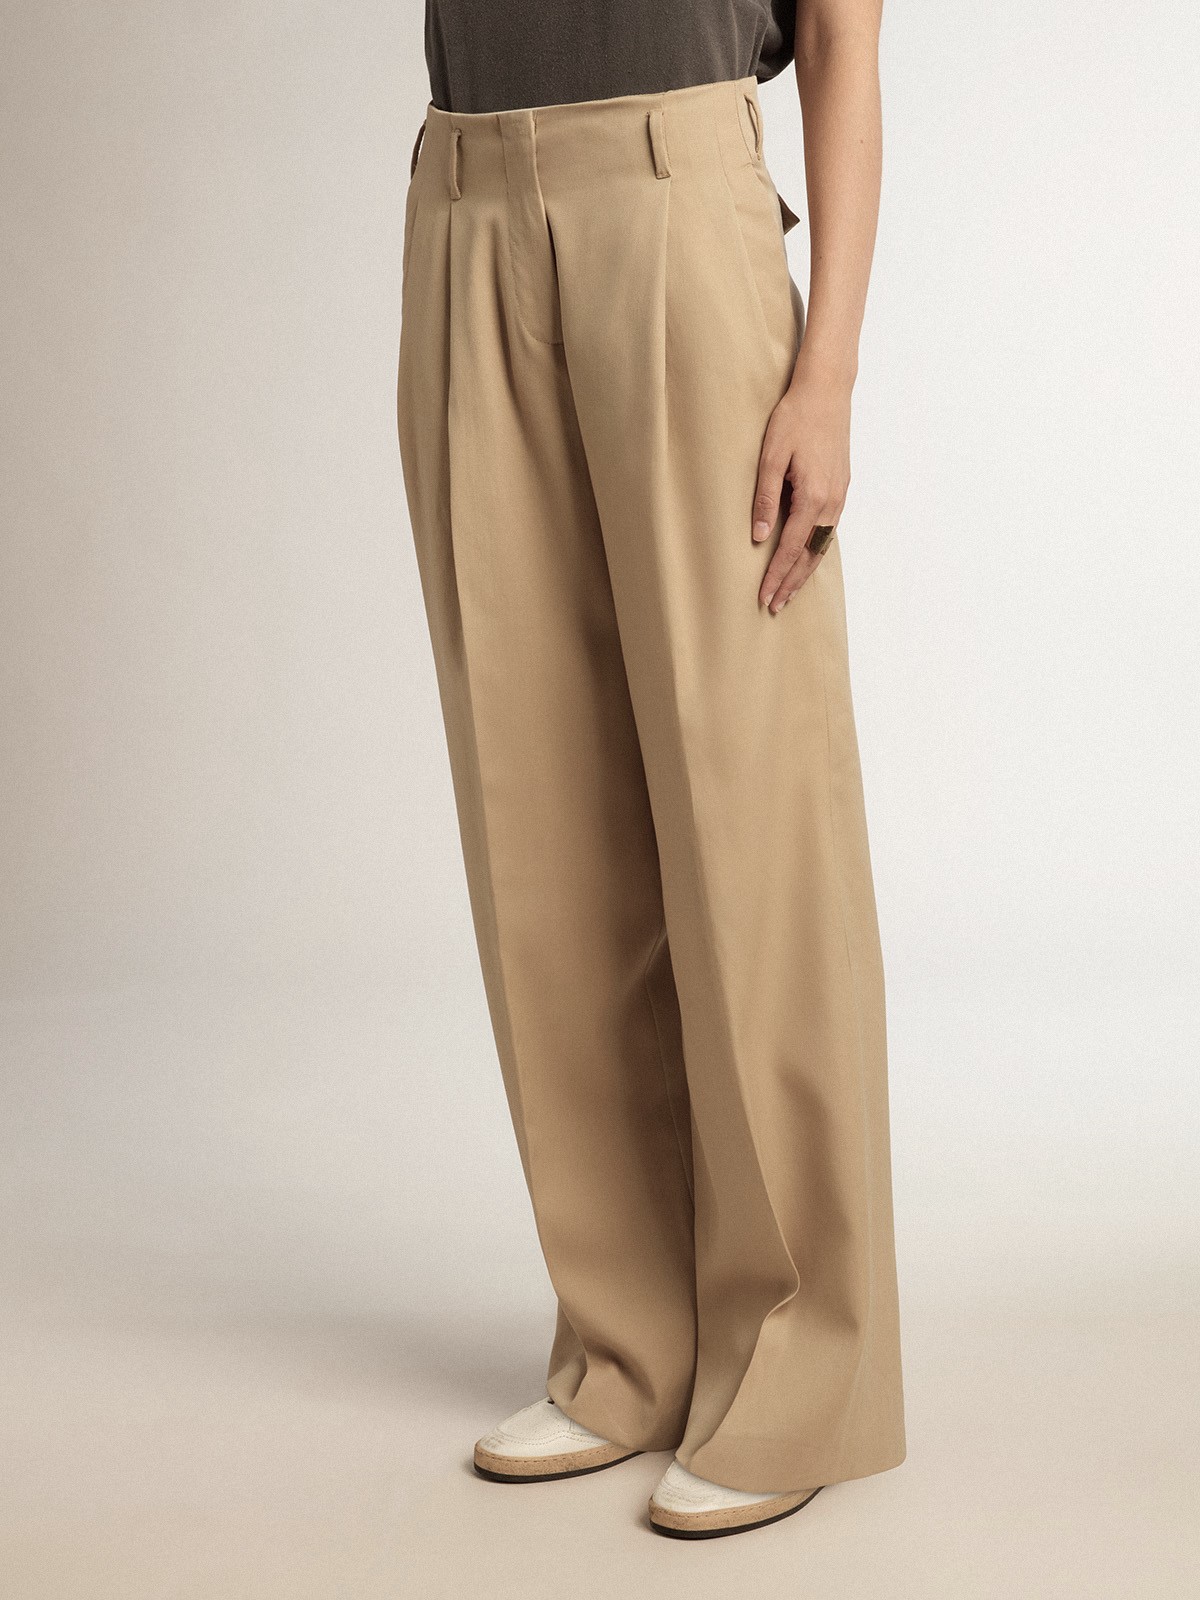 GOLDEN GOOSE Pant Flavia in Sand